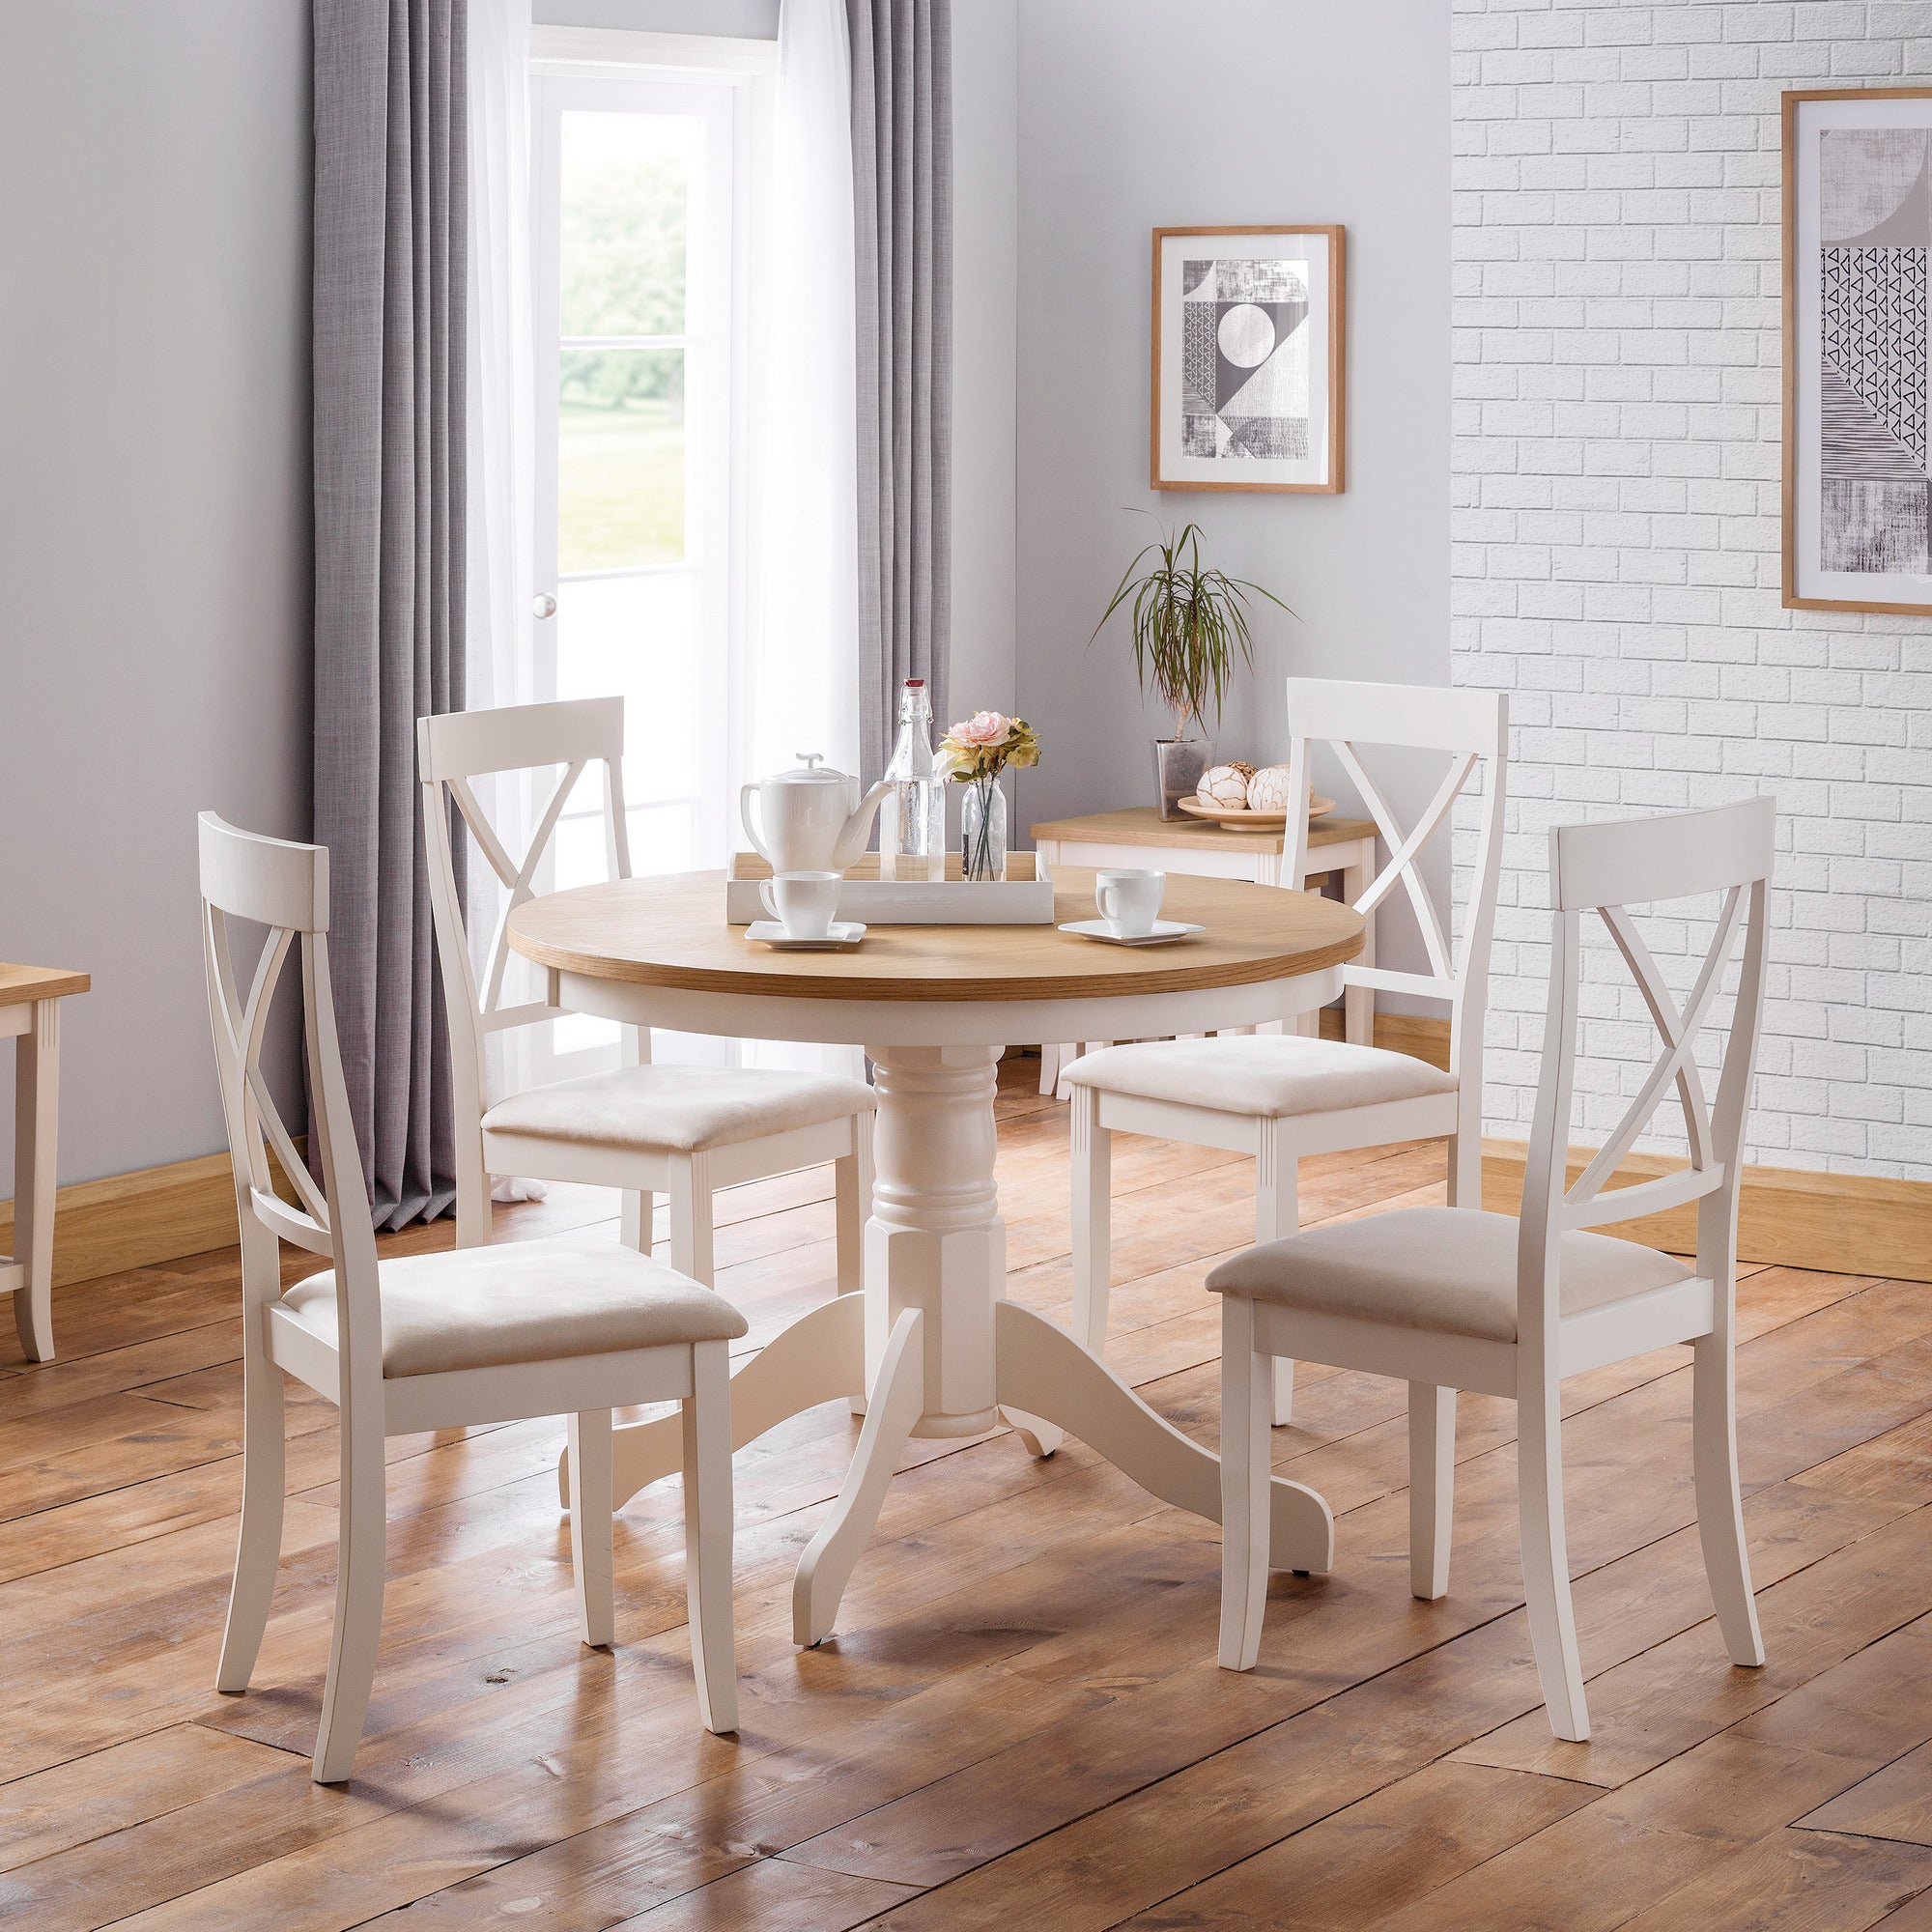 Davenport Round Pedestal Dining Table With 4 Chairs Off White Beige